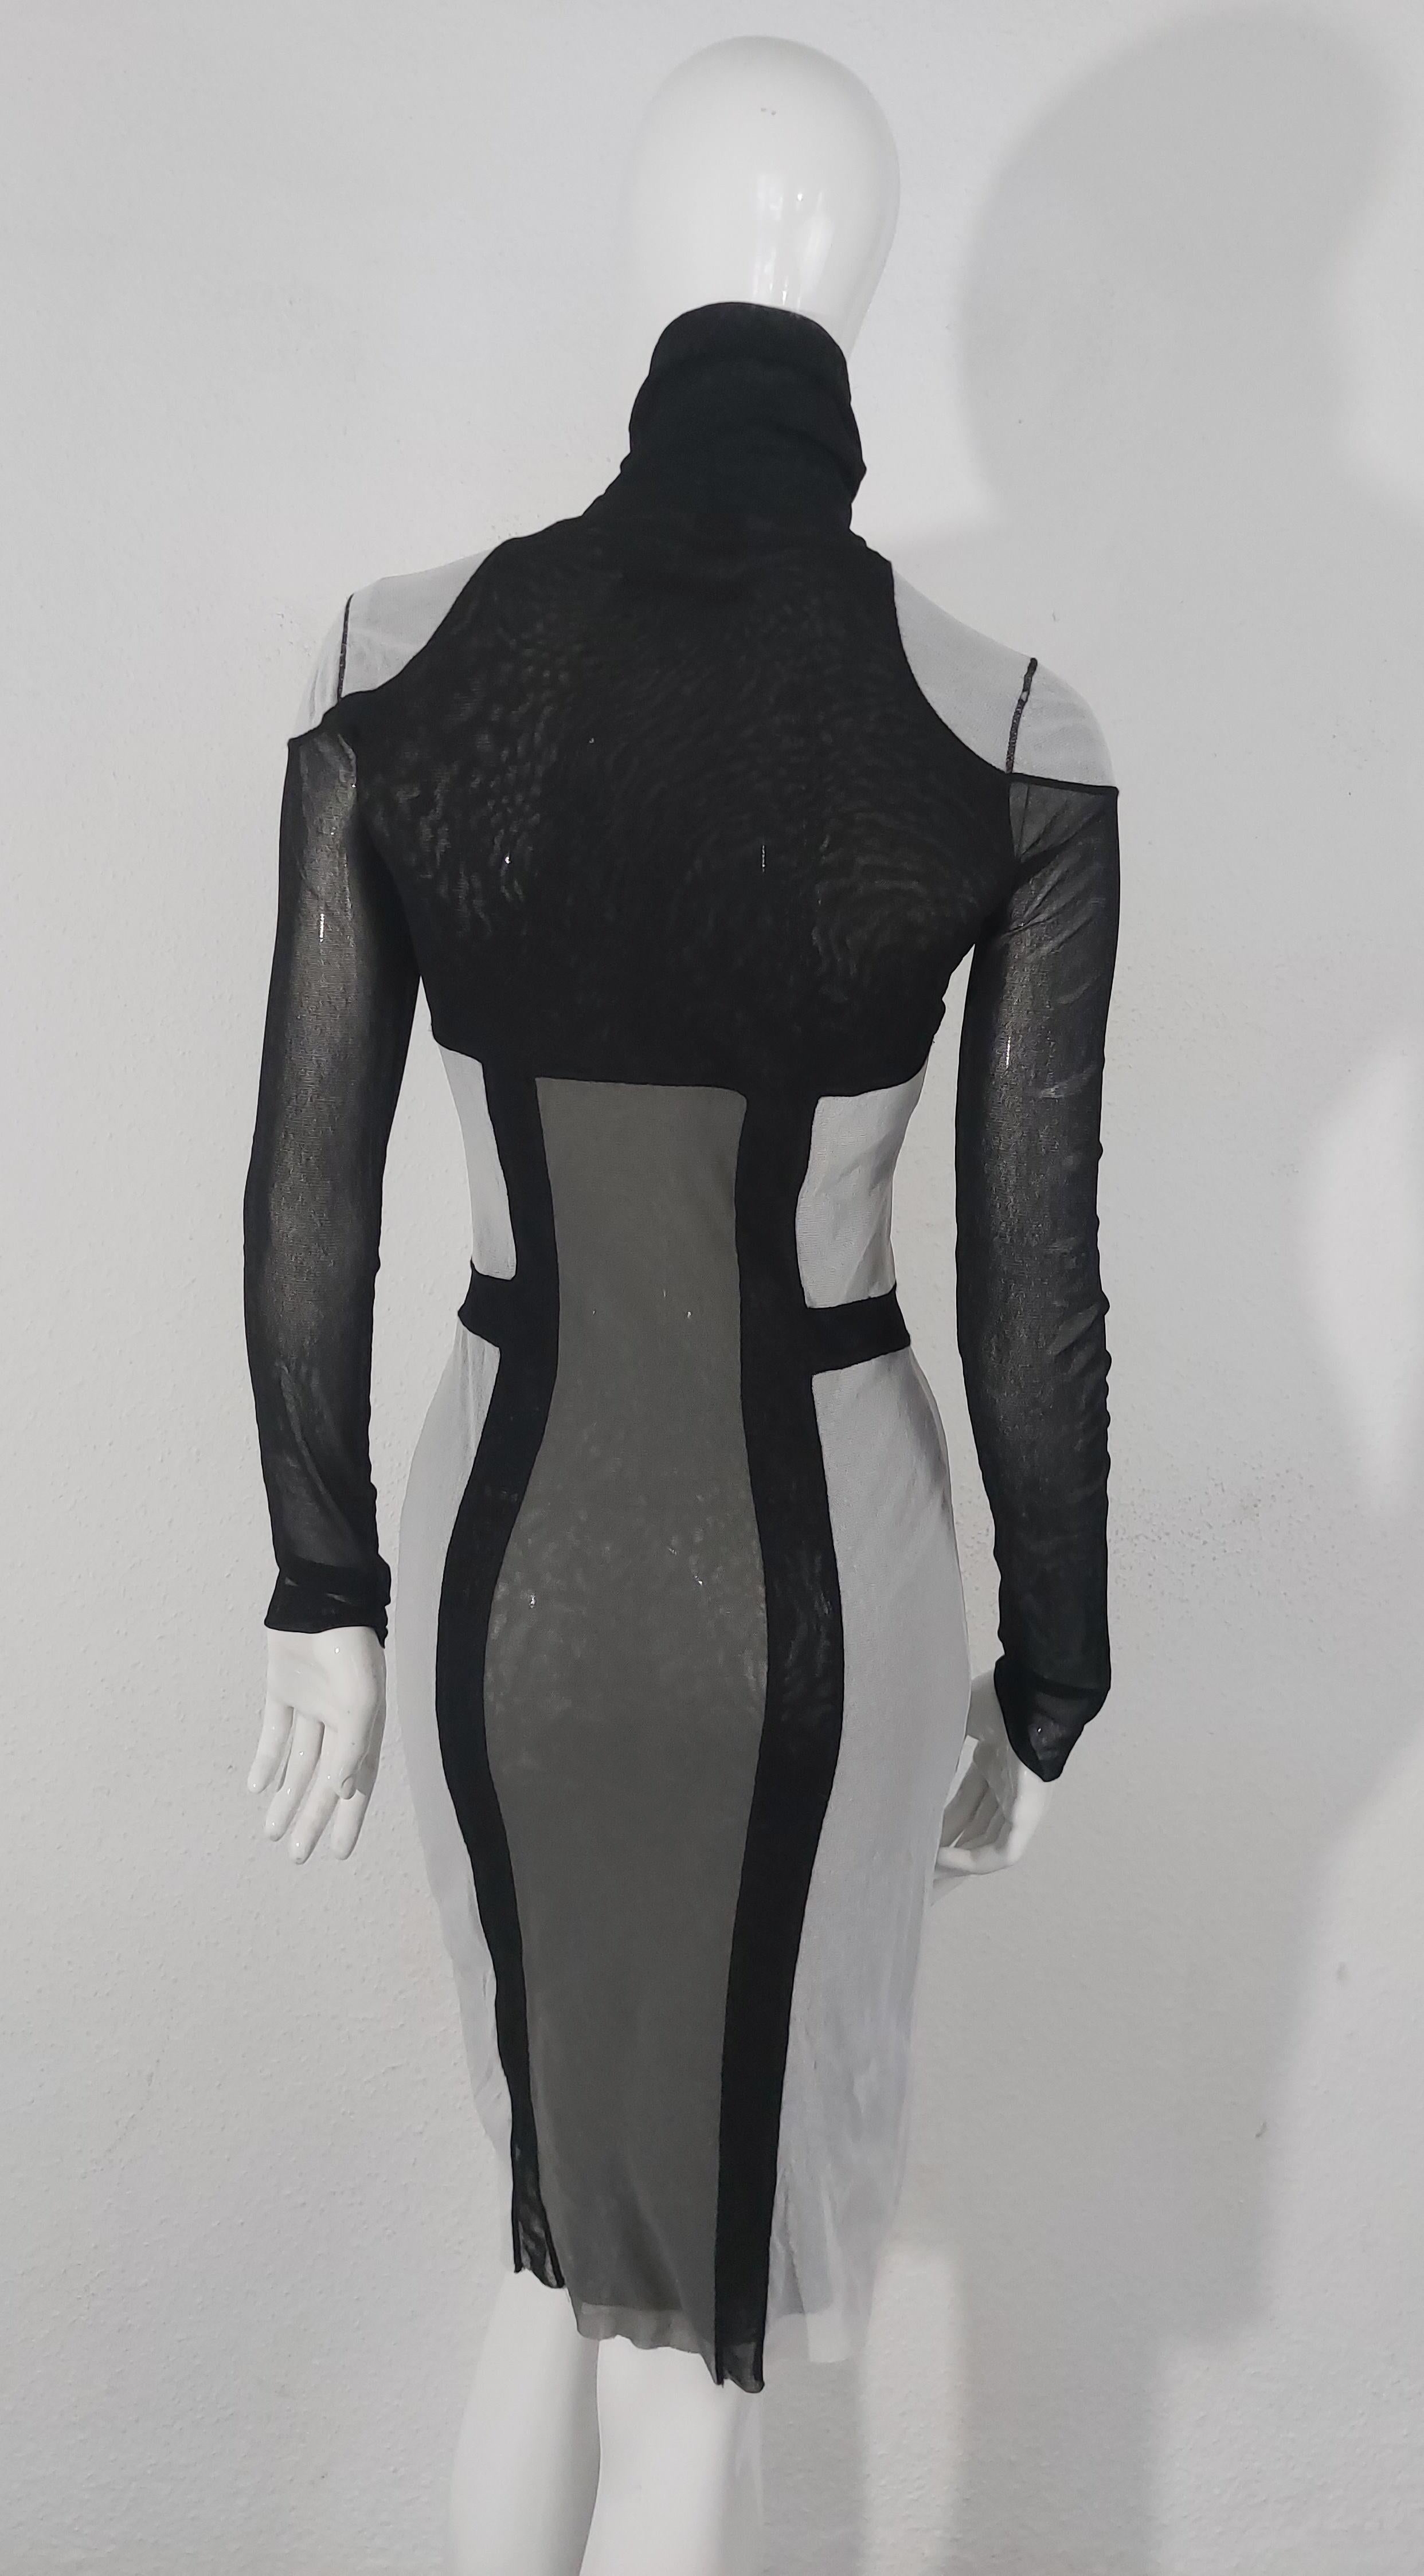 Jean Paul Gaultier Soleil Robot Cyber 5th Element Black and Grey Trompe L'oeil Sci-fi SS90 Turtleneck Colorblock Mesh Transparent Midi  Dress


It was the turn of the century and sci-fi fashions of the future were on every designers mind. Jean Paul